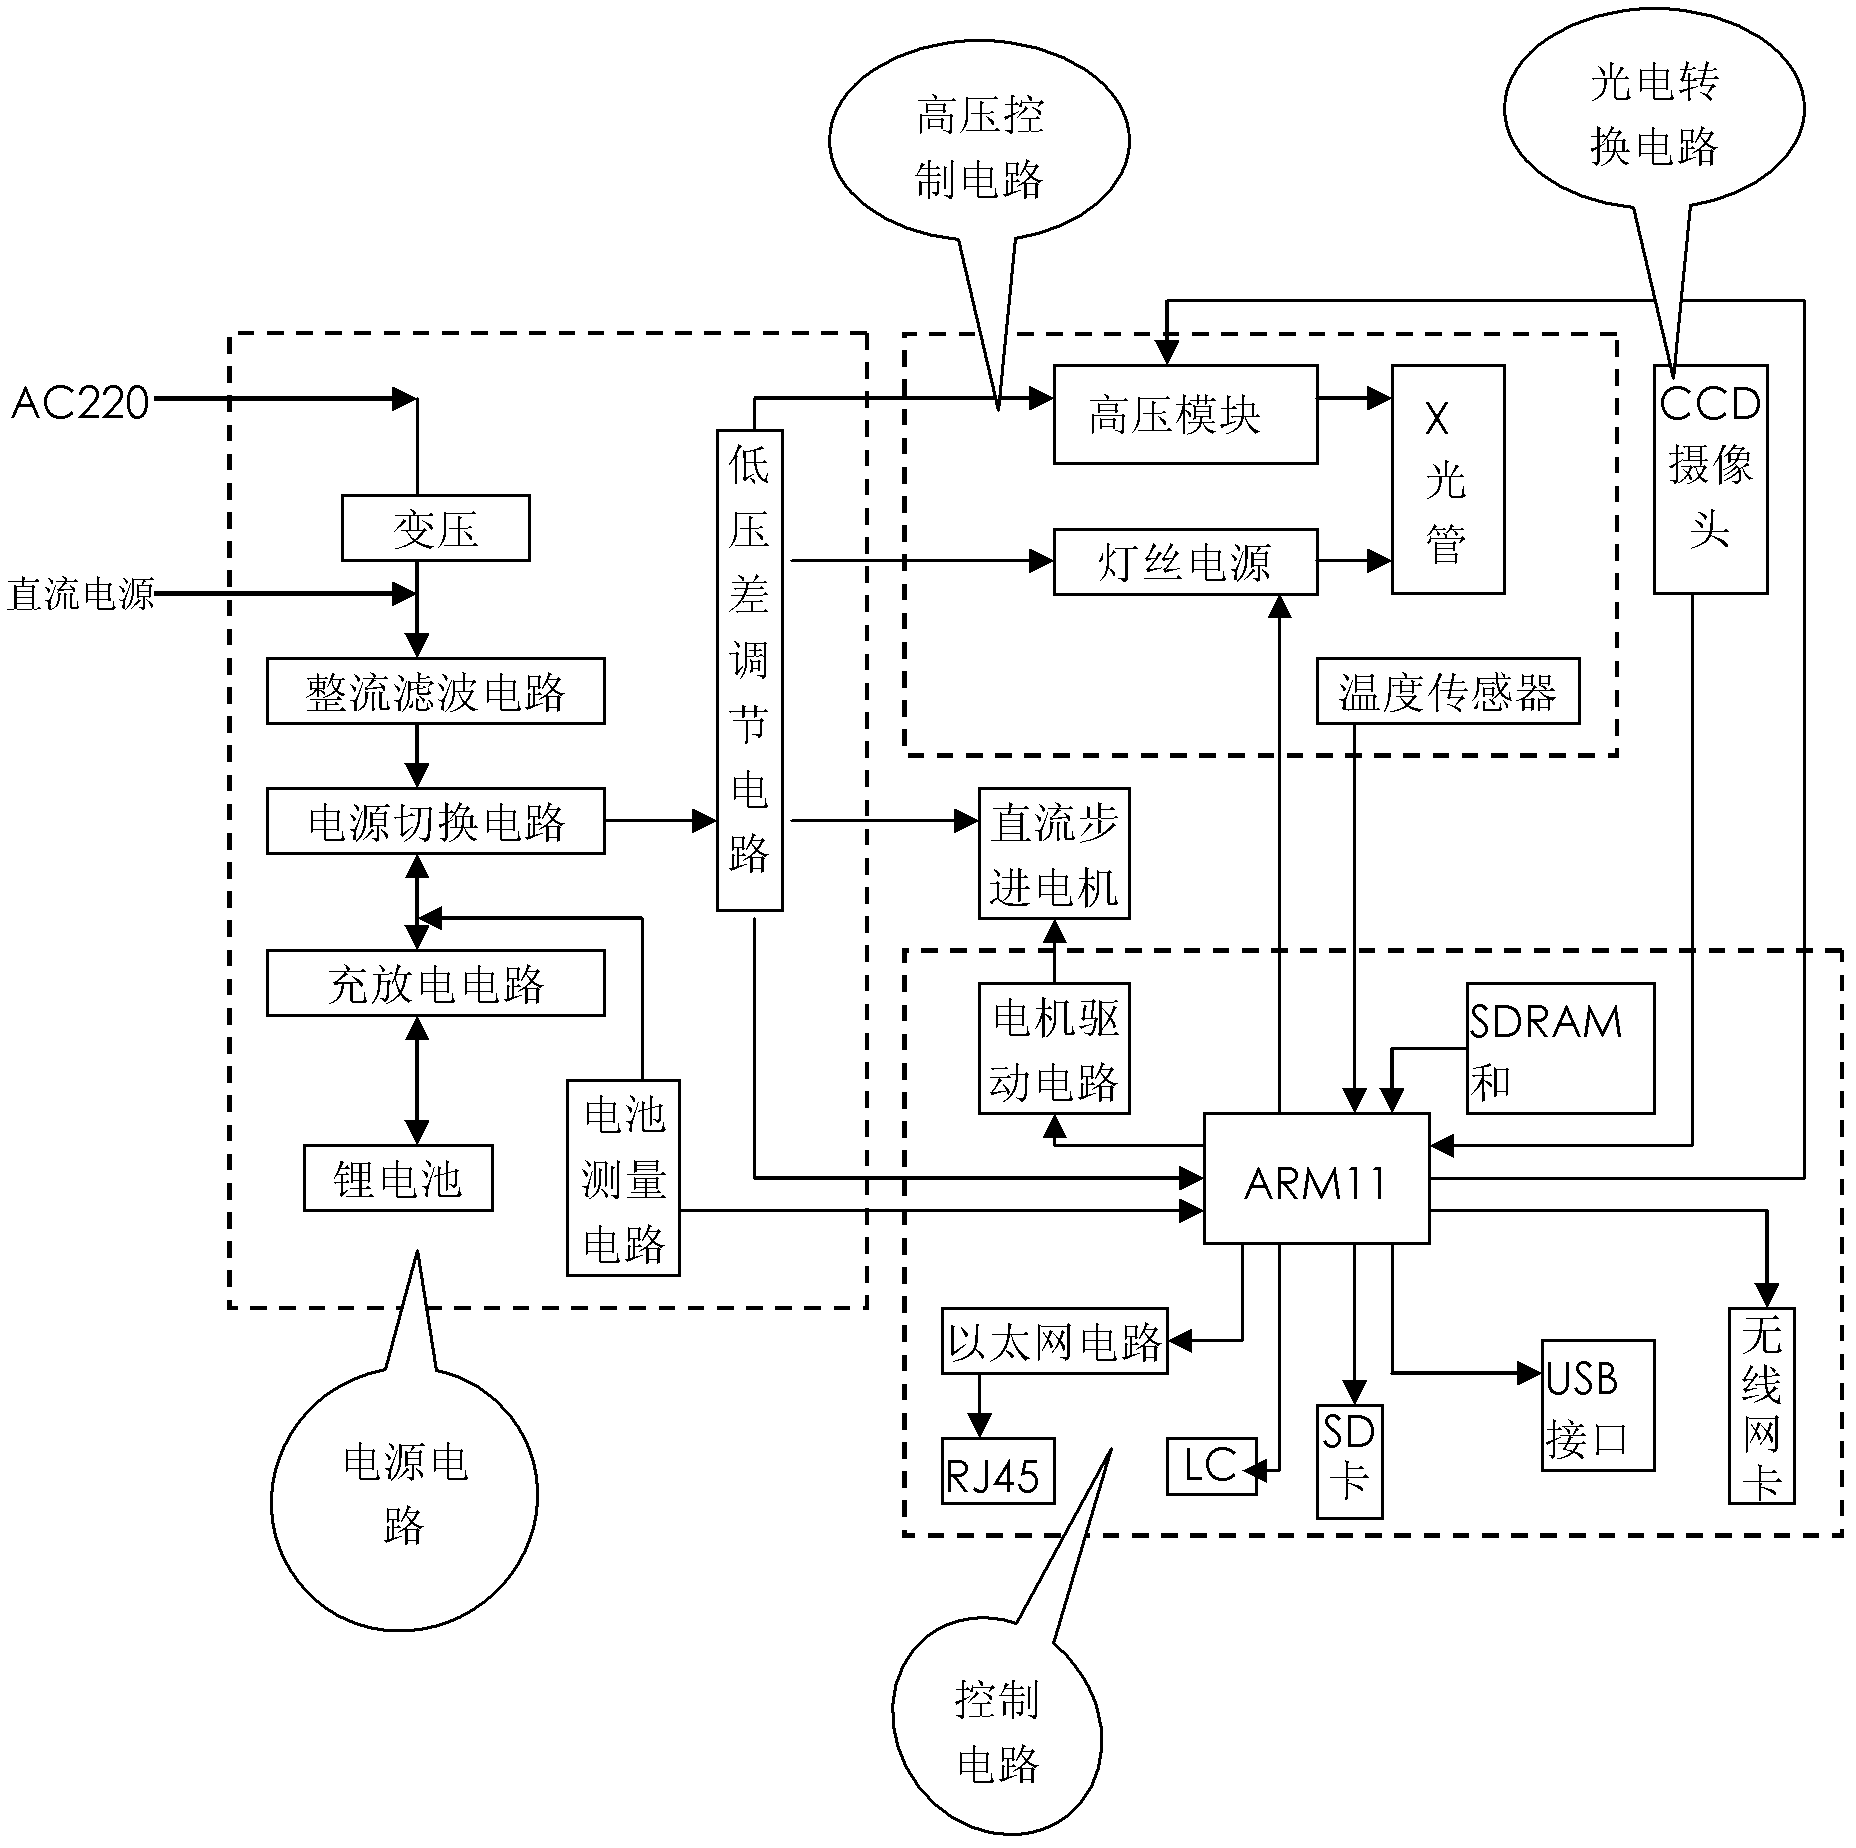 Circuit control system of X-ray inspection instrument